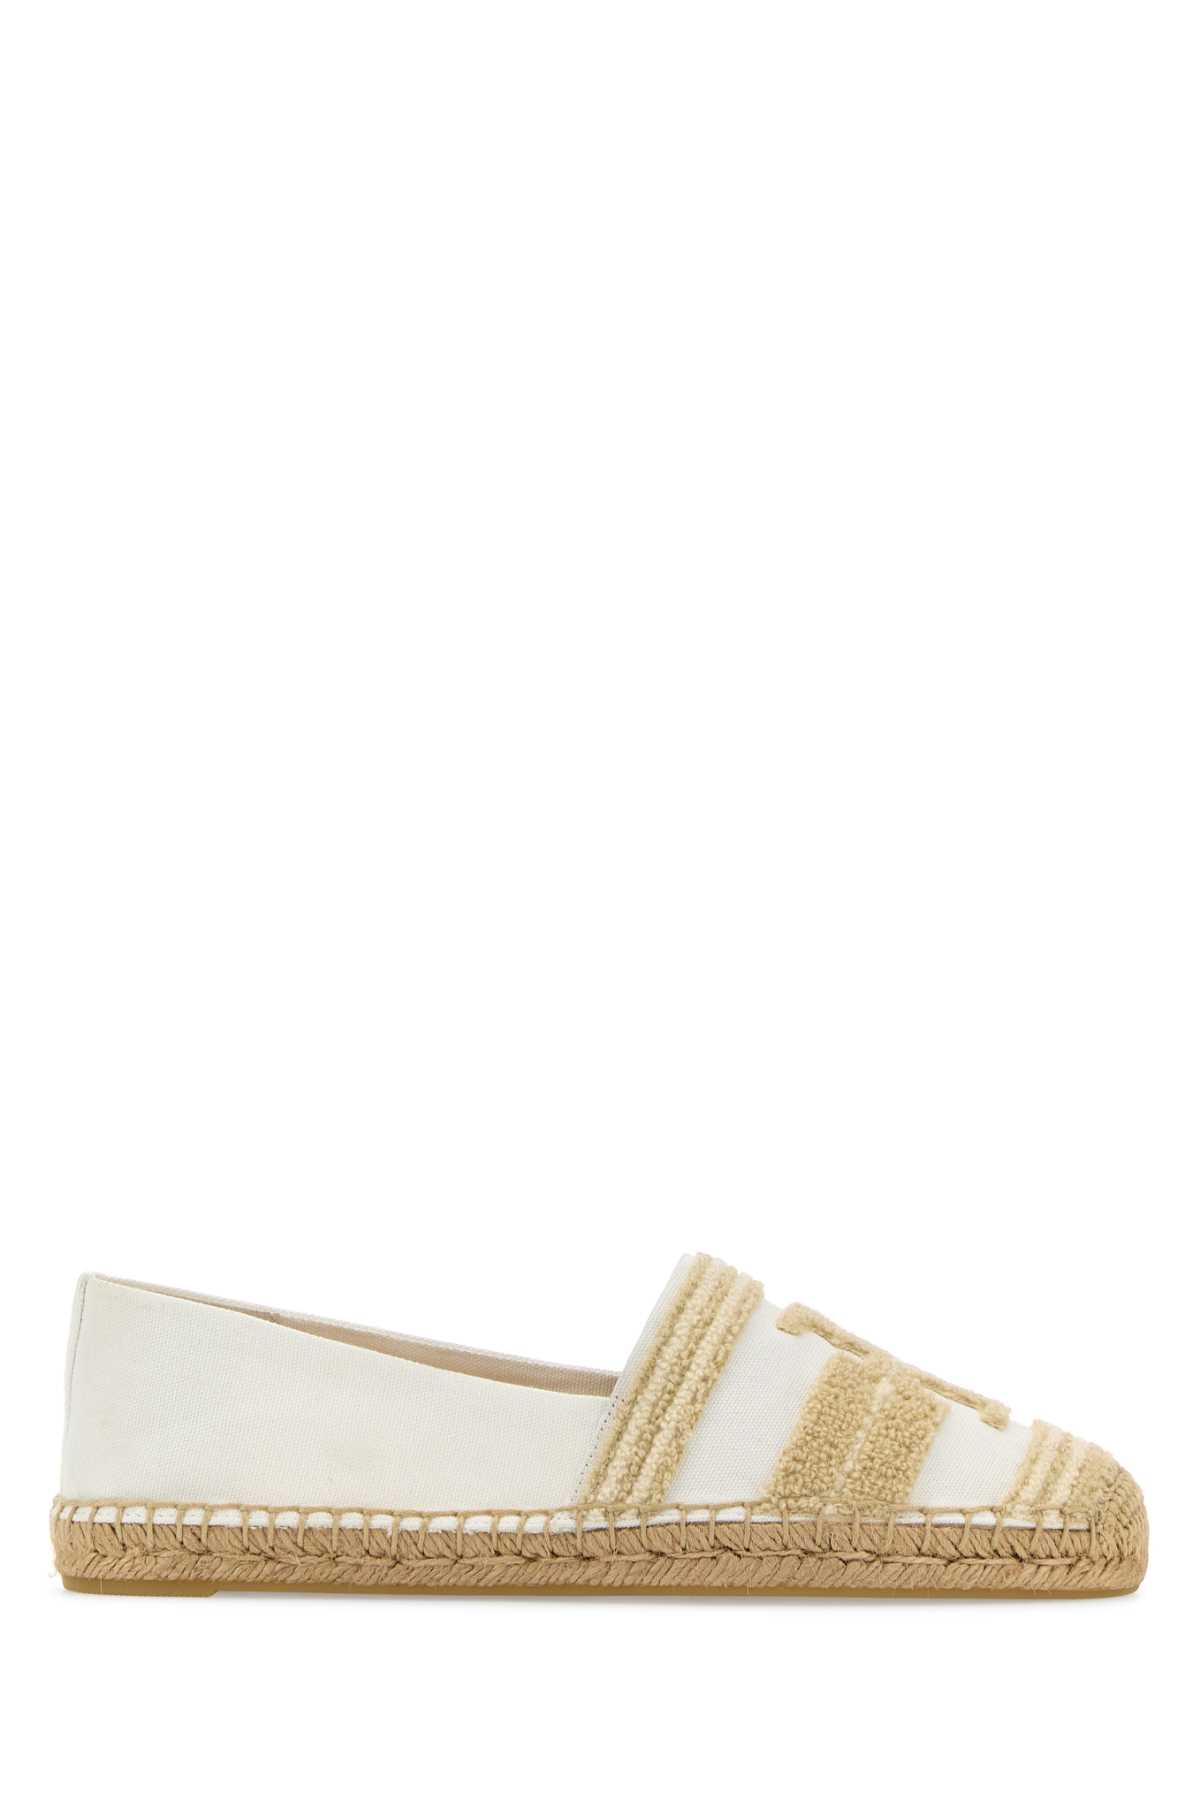 Shop Tory Burch White Canvas Espadrilles In Naturallight